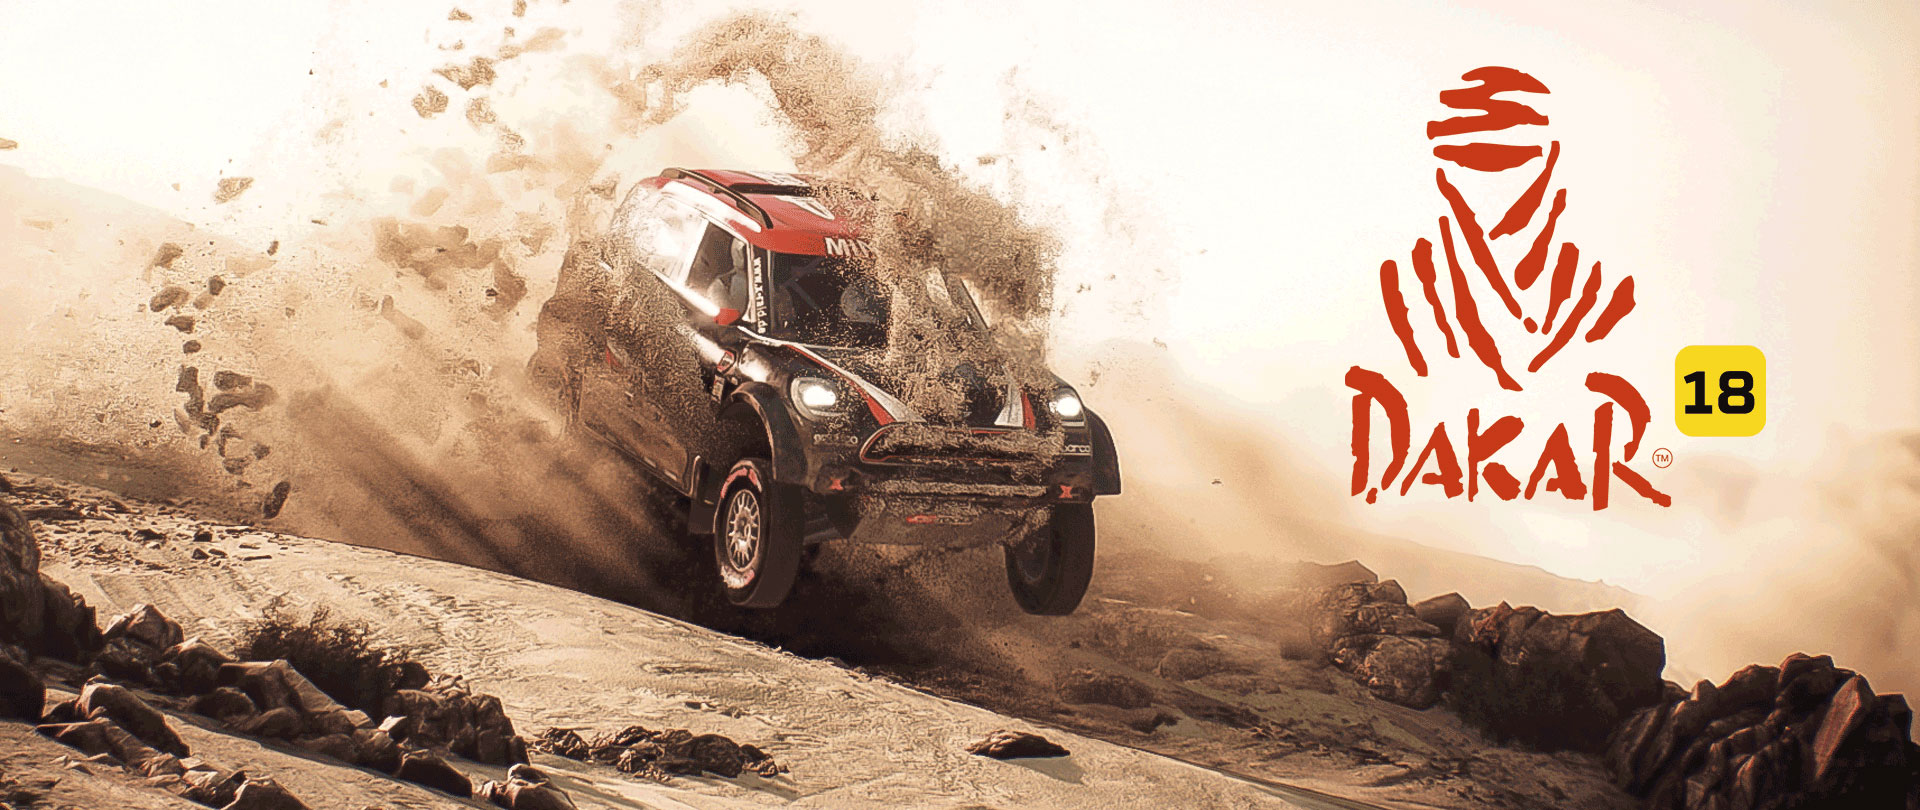 Dakar 18 Review – The Road To Nowhere